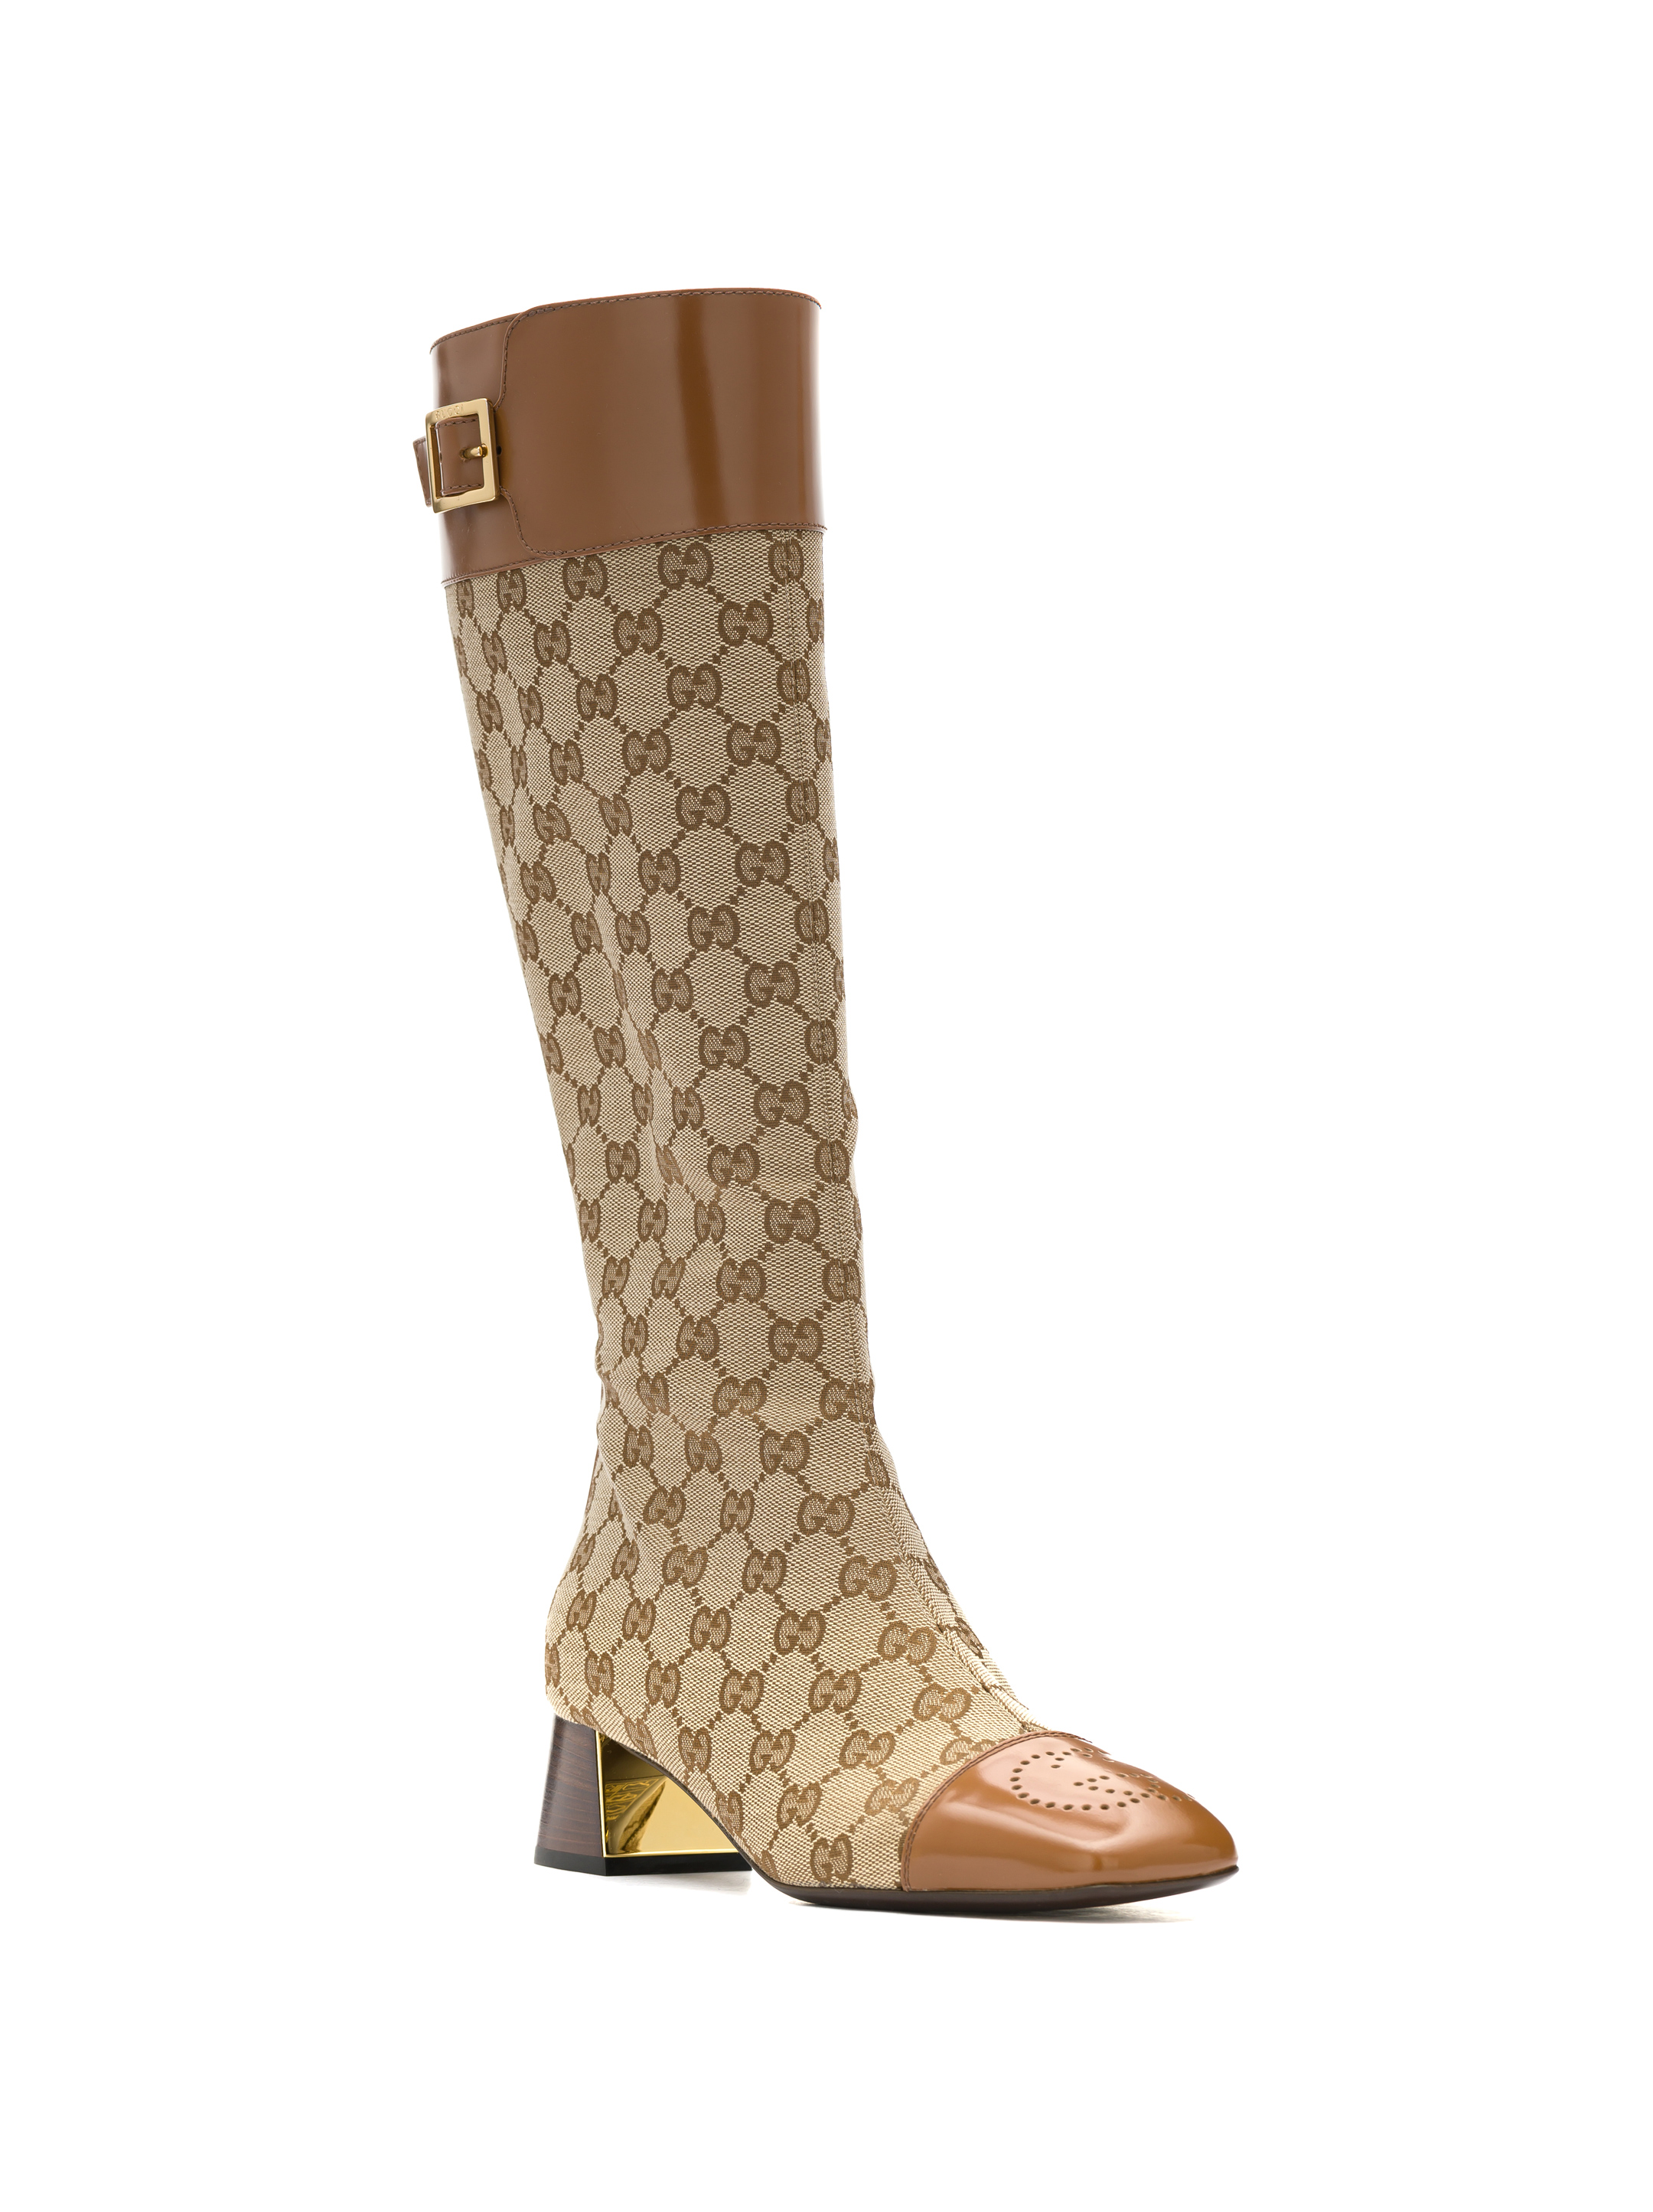 Gucci women's GG Supreme monogram High boots buy for 821100 KZT in the official Viled online store, art. 678278 HVKL0.9786_41_221